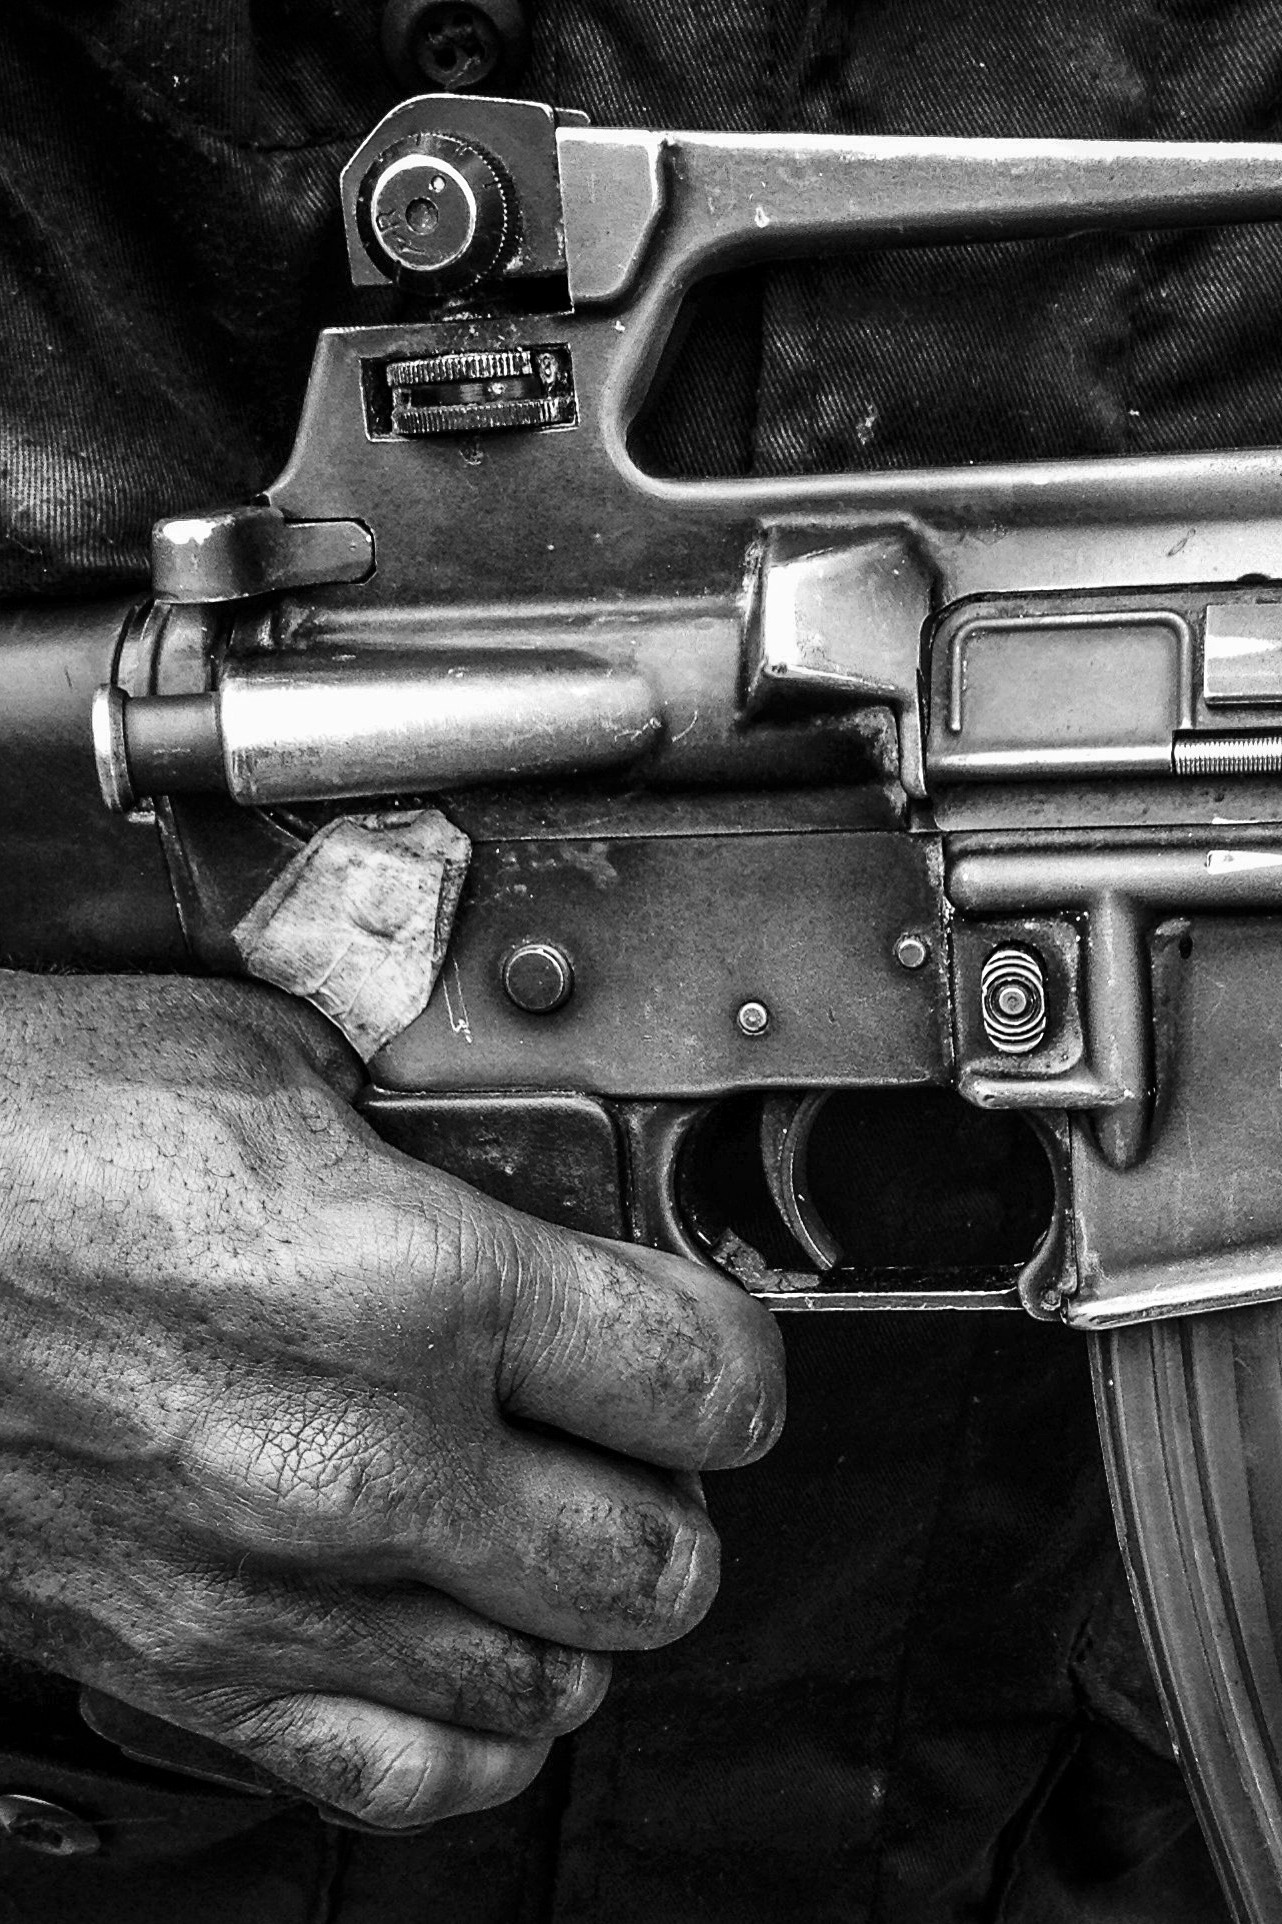 image of AARONTAIT COPYRIGHTED 2014 273 PNG PAPUA NEW GUNIEA DOCUMENTARY PHOTOGRAPHER BLACK WHITE PORTRAIT TRIBAL TRADITIONAL TRAVEL PHOTOGRAPHER SECURITY GUN M16 POLICE ARMED HEALTH SAFETY